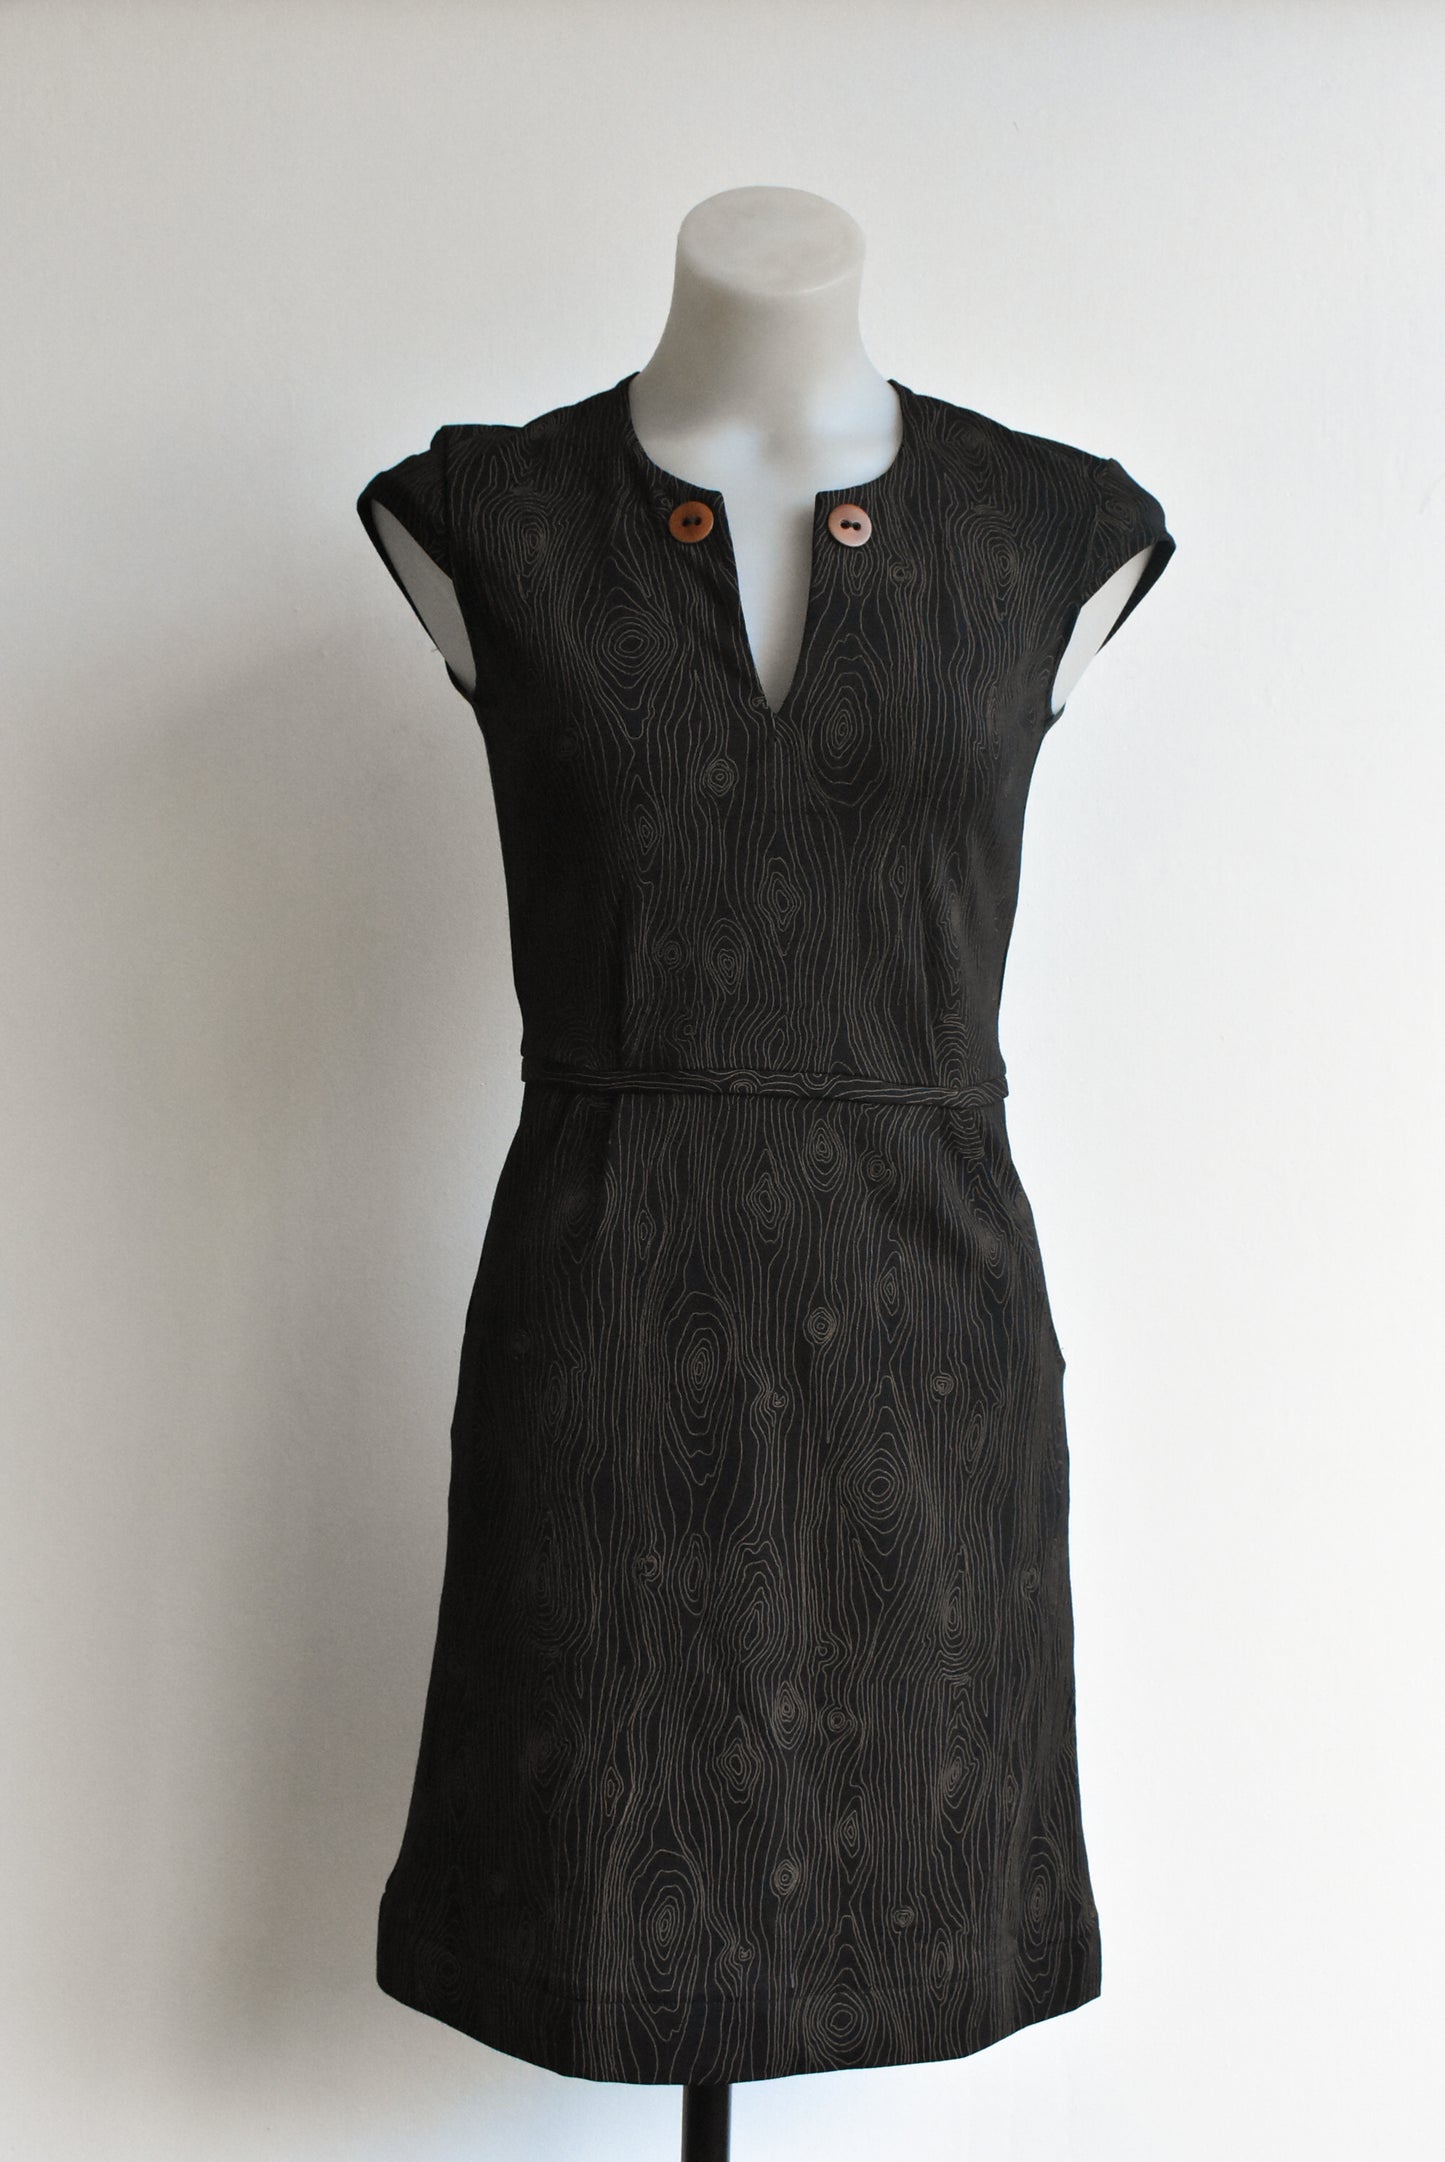 Kate Sylvester black 'wood-grain' dress with pockets, size XS